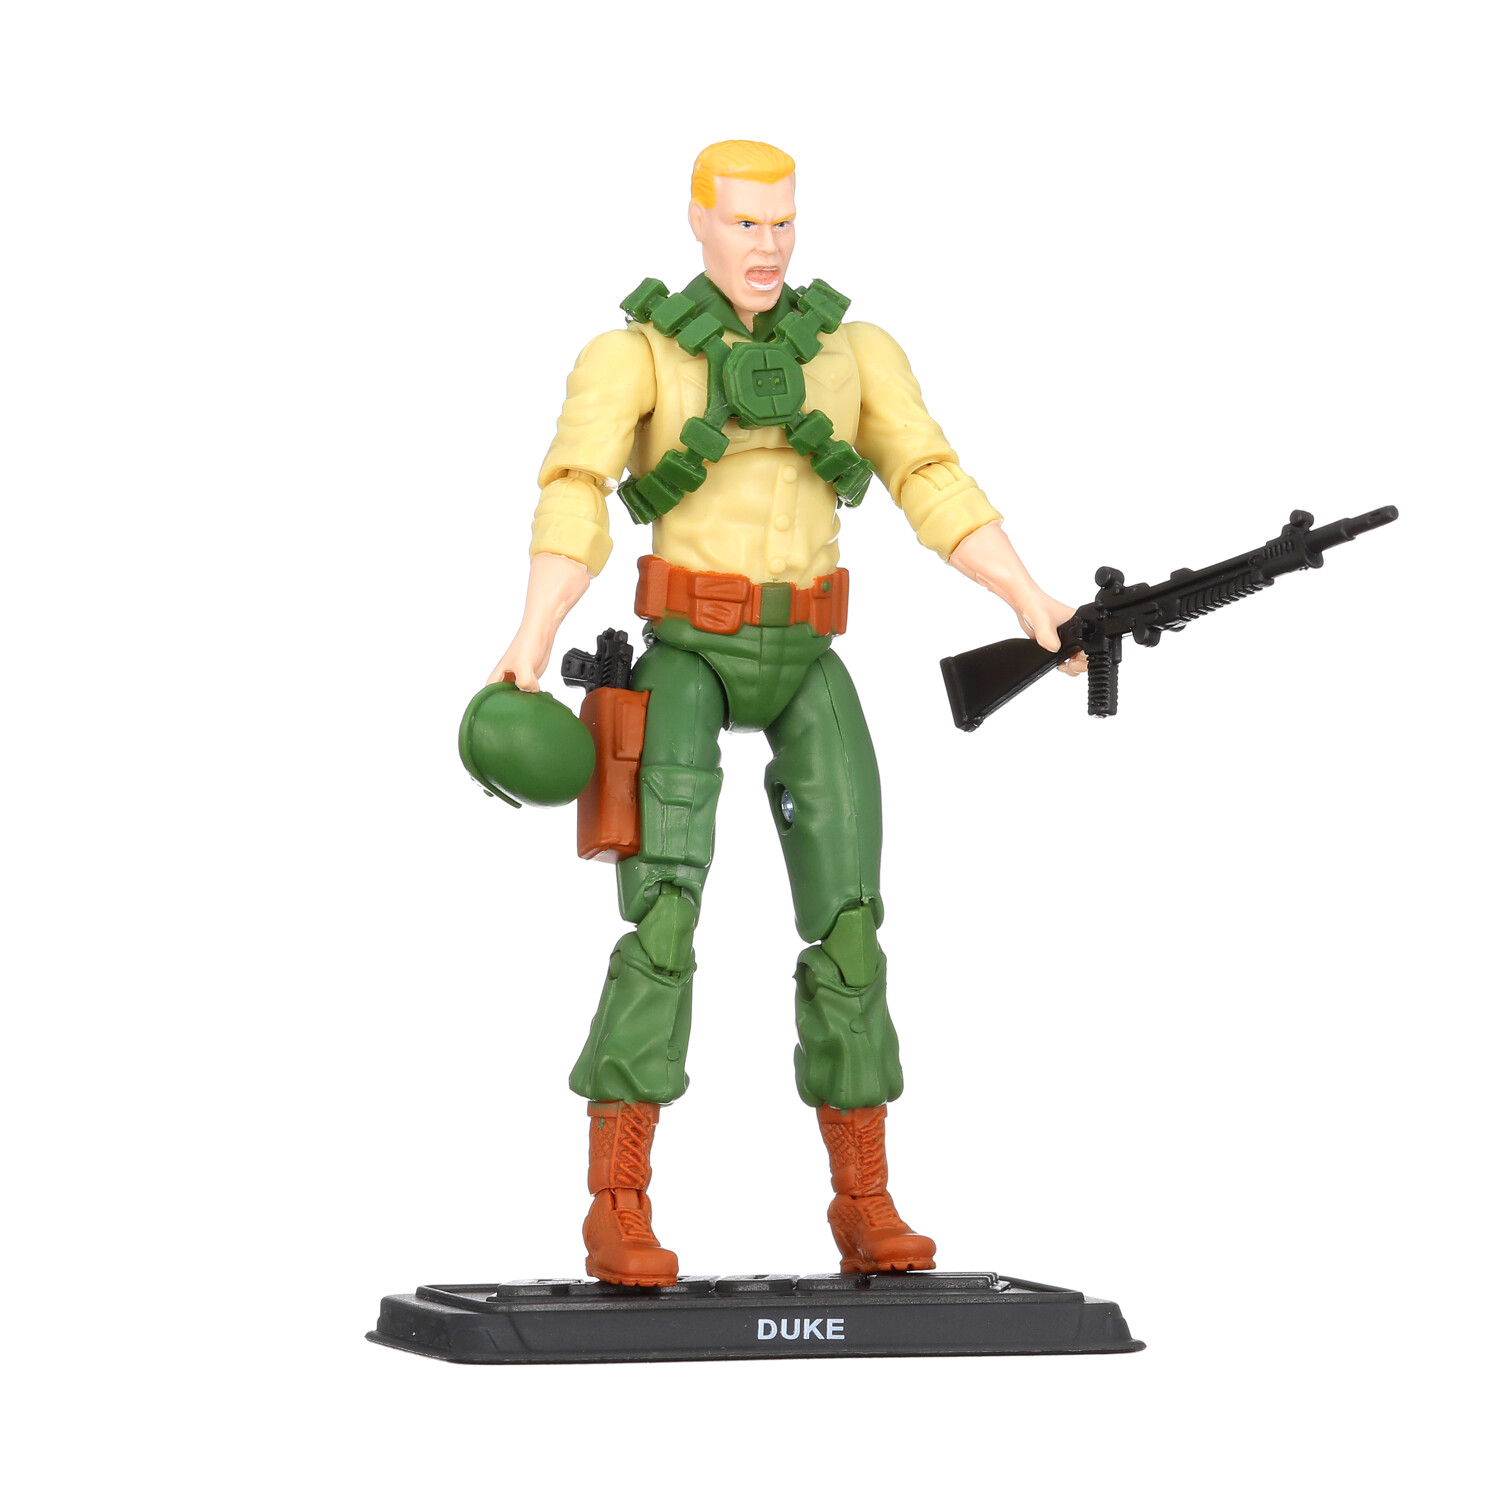 G.I. Joe: Retro Collection Duke Kids Toy Action Figure for Boys and 